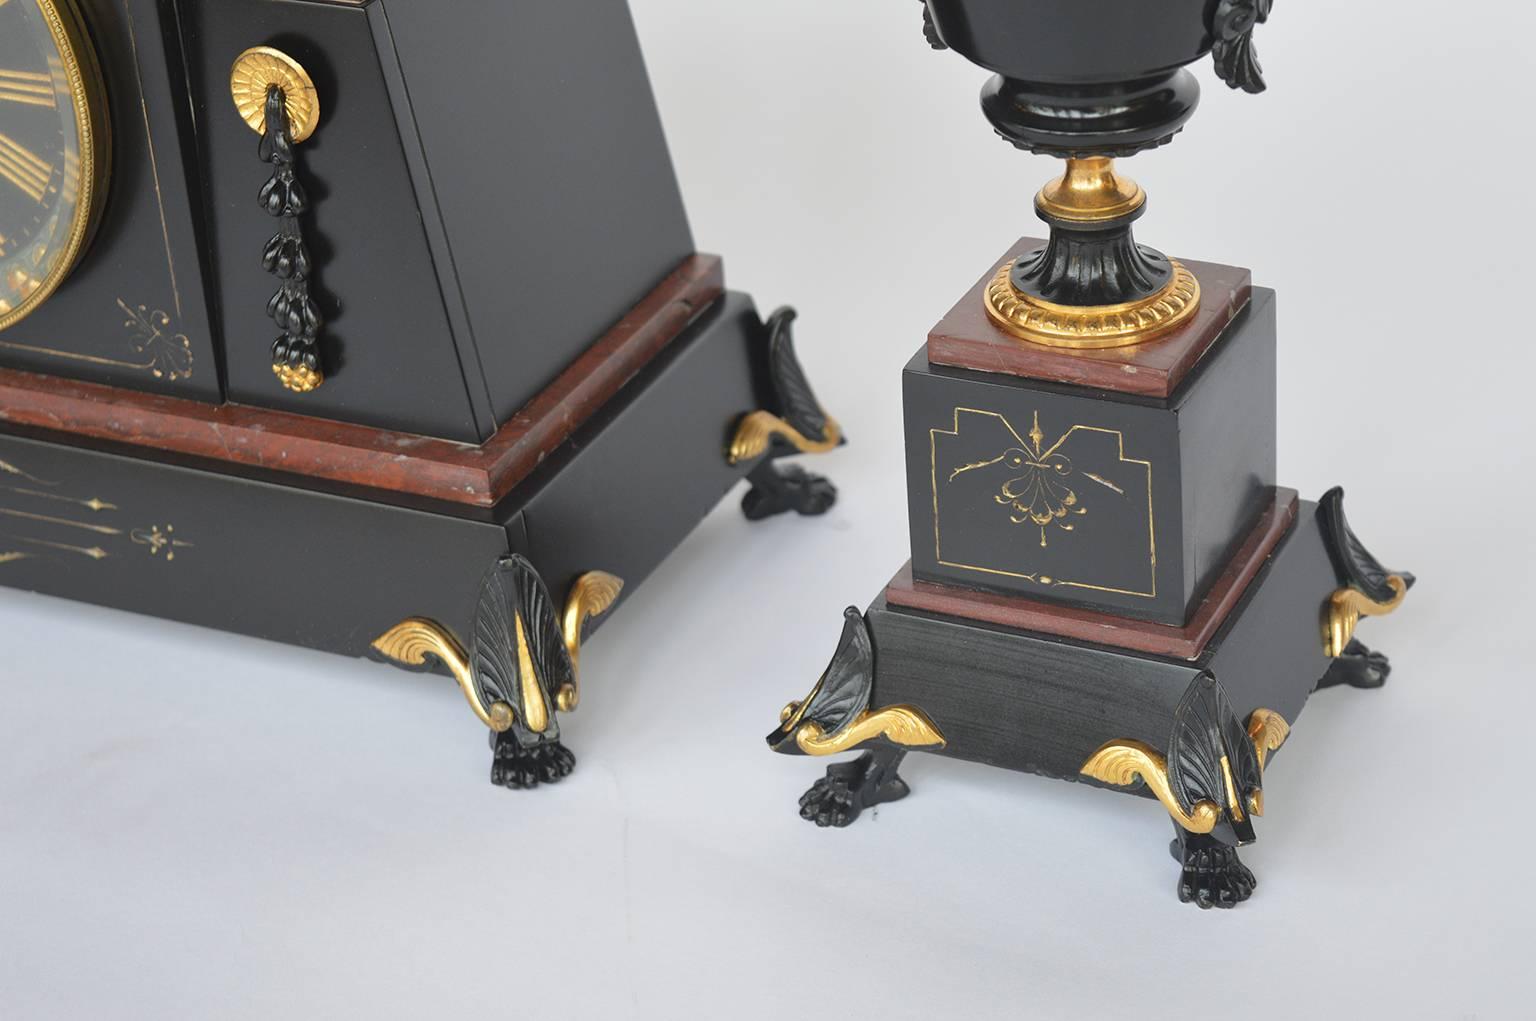 French bronze and marble Egyptian inspired clockset. Bronze with black patina.
Measurements of urns: 13.5